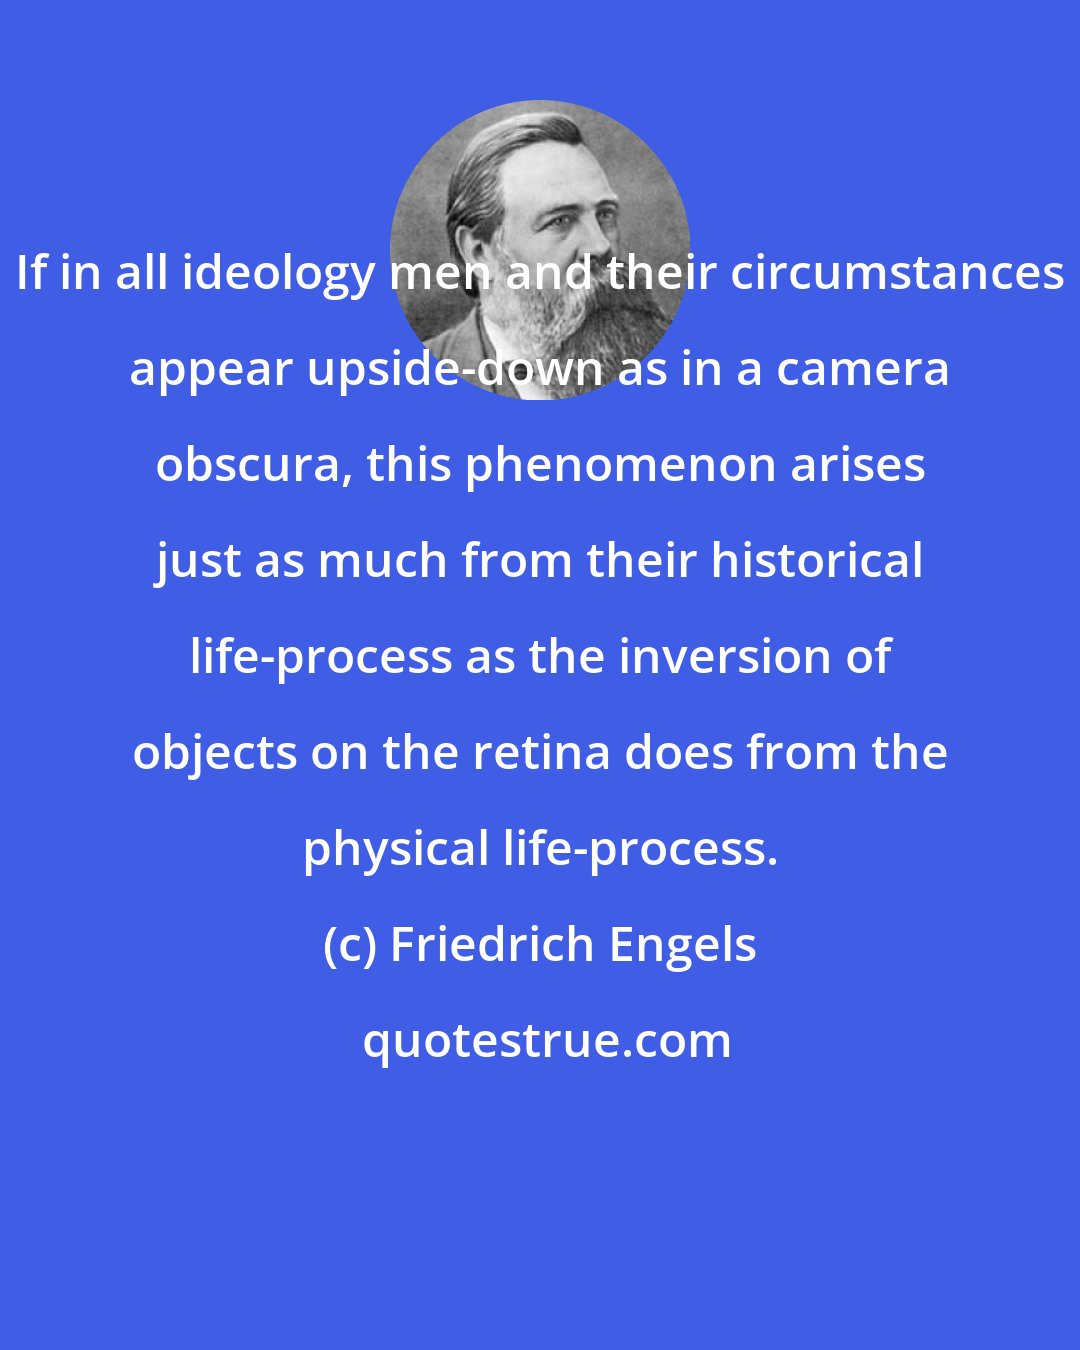 Friedrich Engels: If in all ideology men and their circumstances appear upside-down as in a camera obscura, this phenomenon arises just as much from their historical life-process as the inversion of objects on the retina does from the physical life-process.